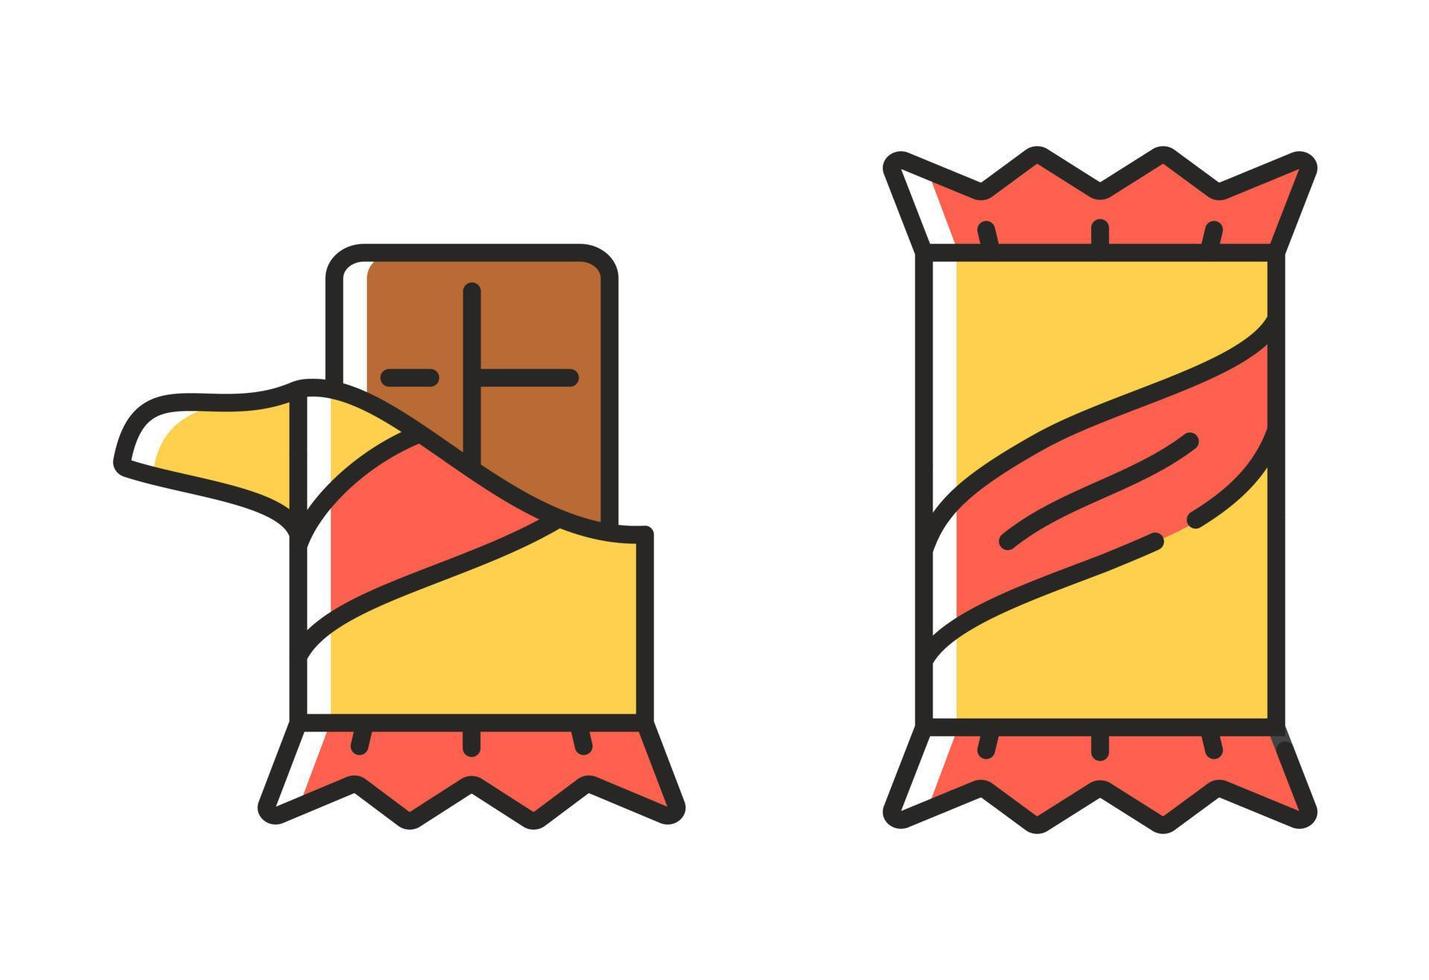 Chocolate Bar icons. Simple Linear symbols in color. Vector illustrations.